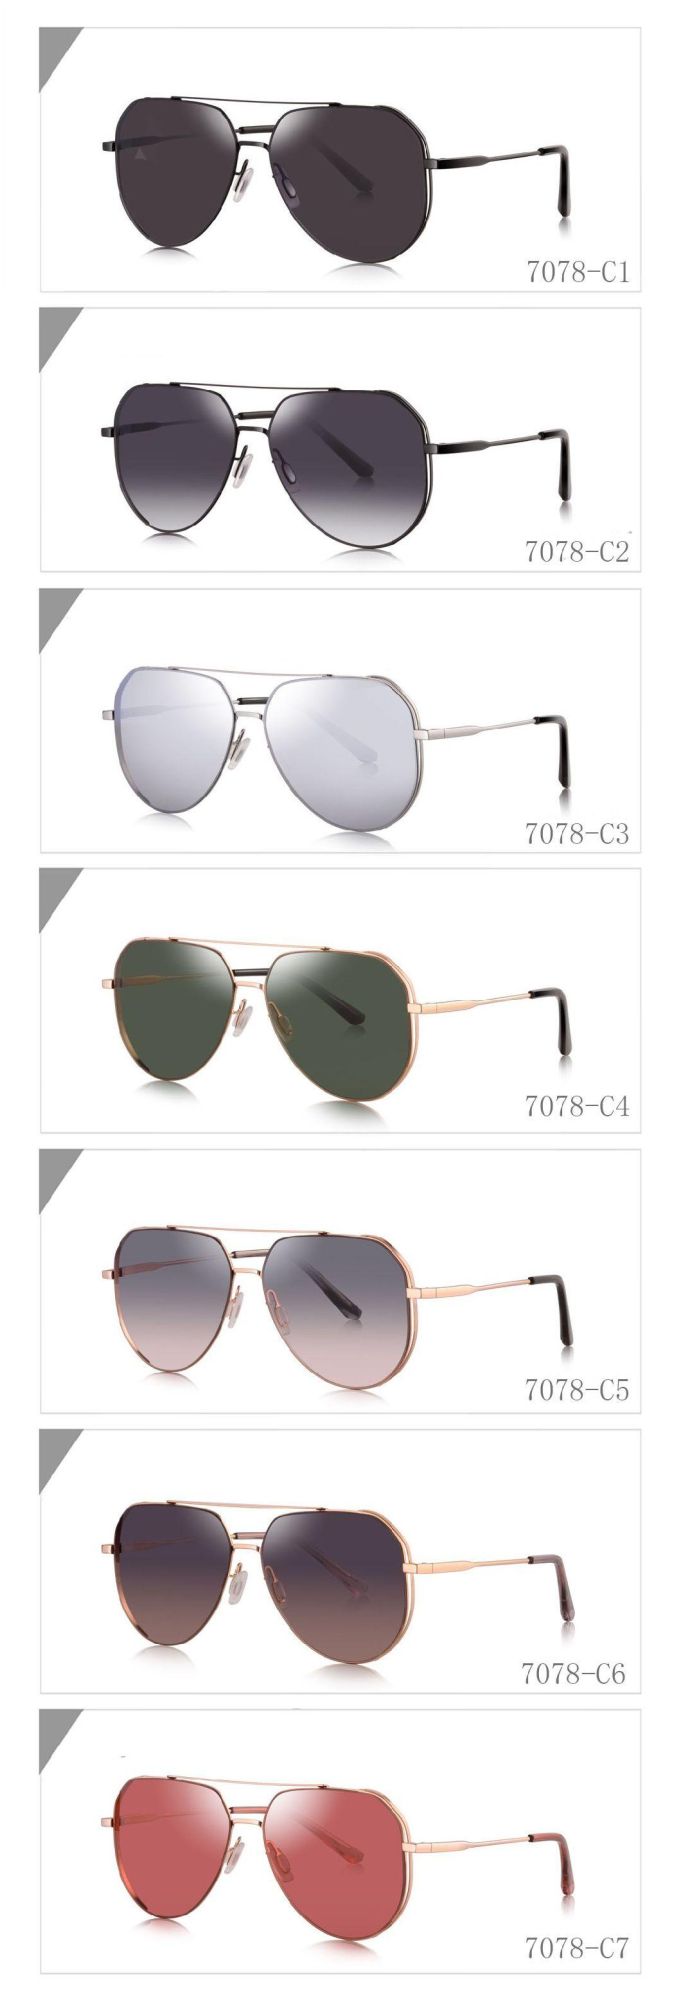 2020 Ready to Ship Wholesale Colorful Unisex Metal Sunglasses